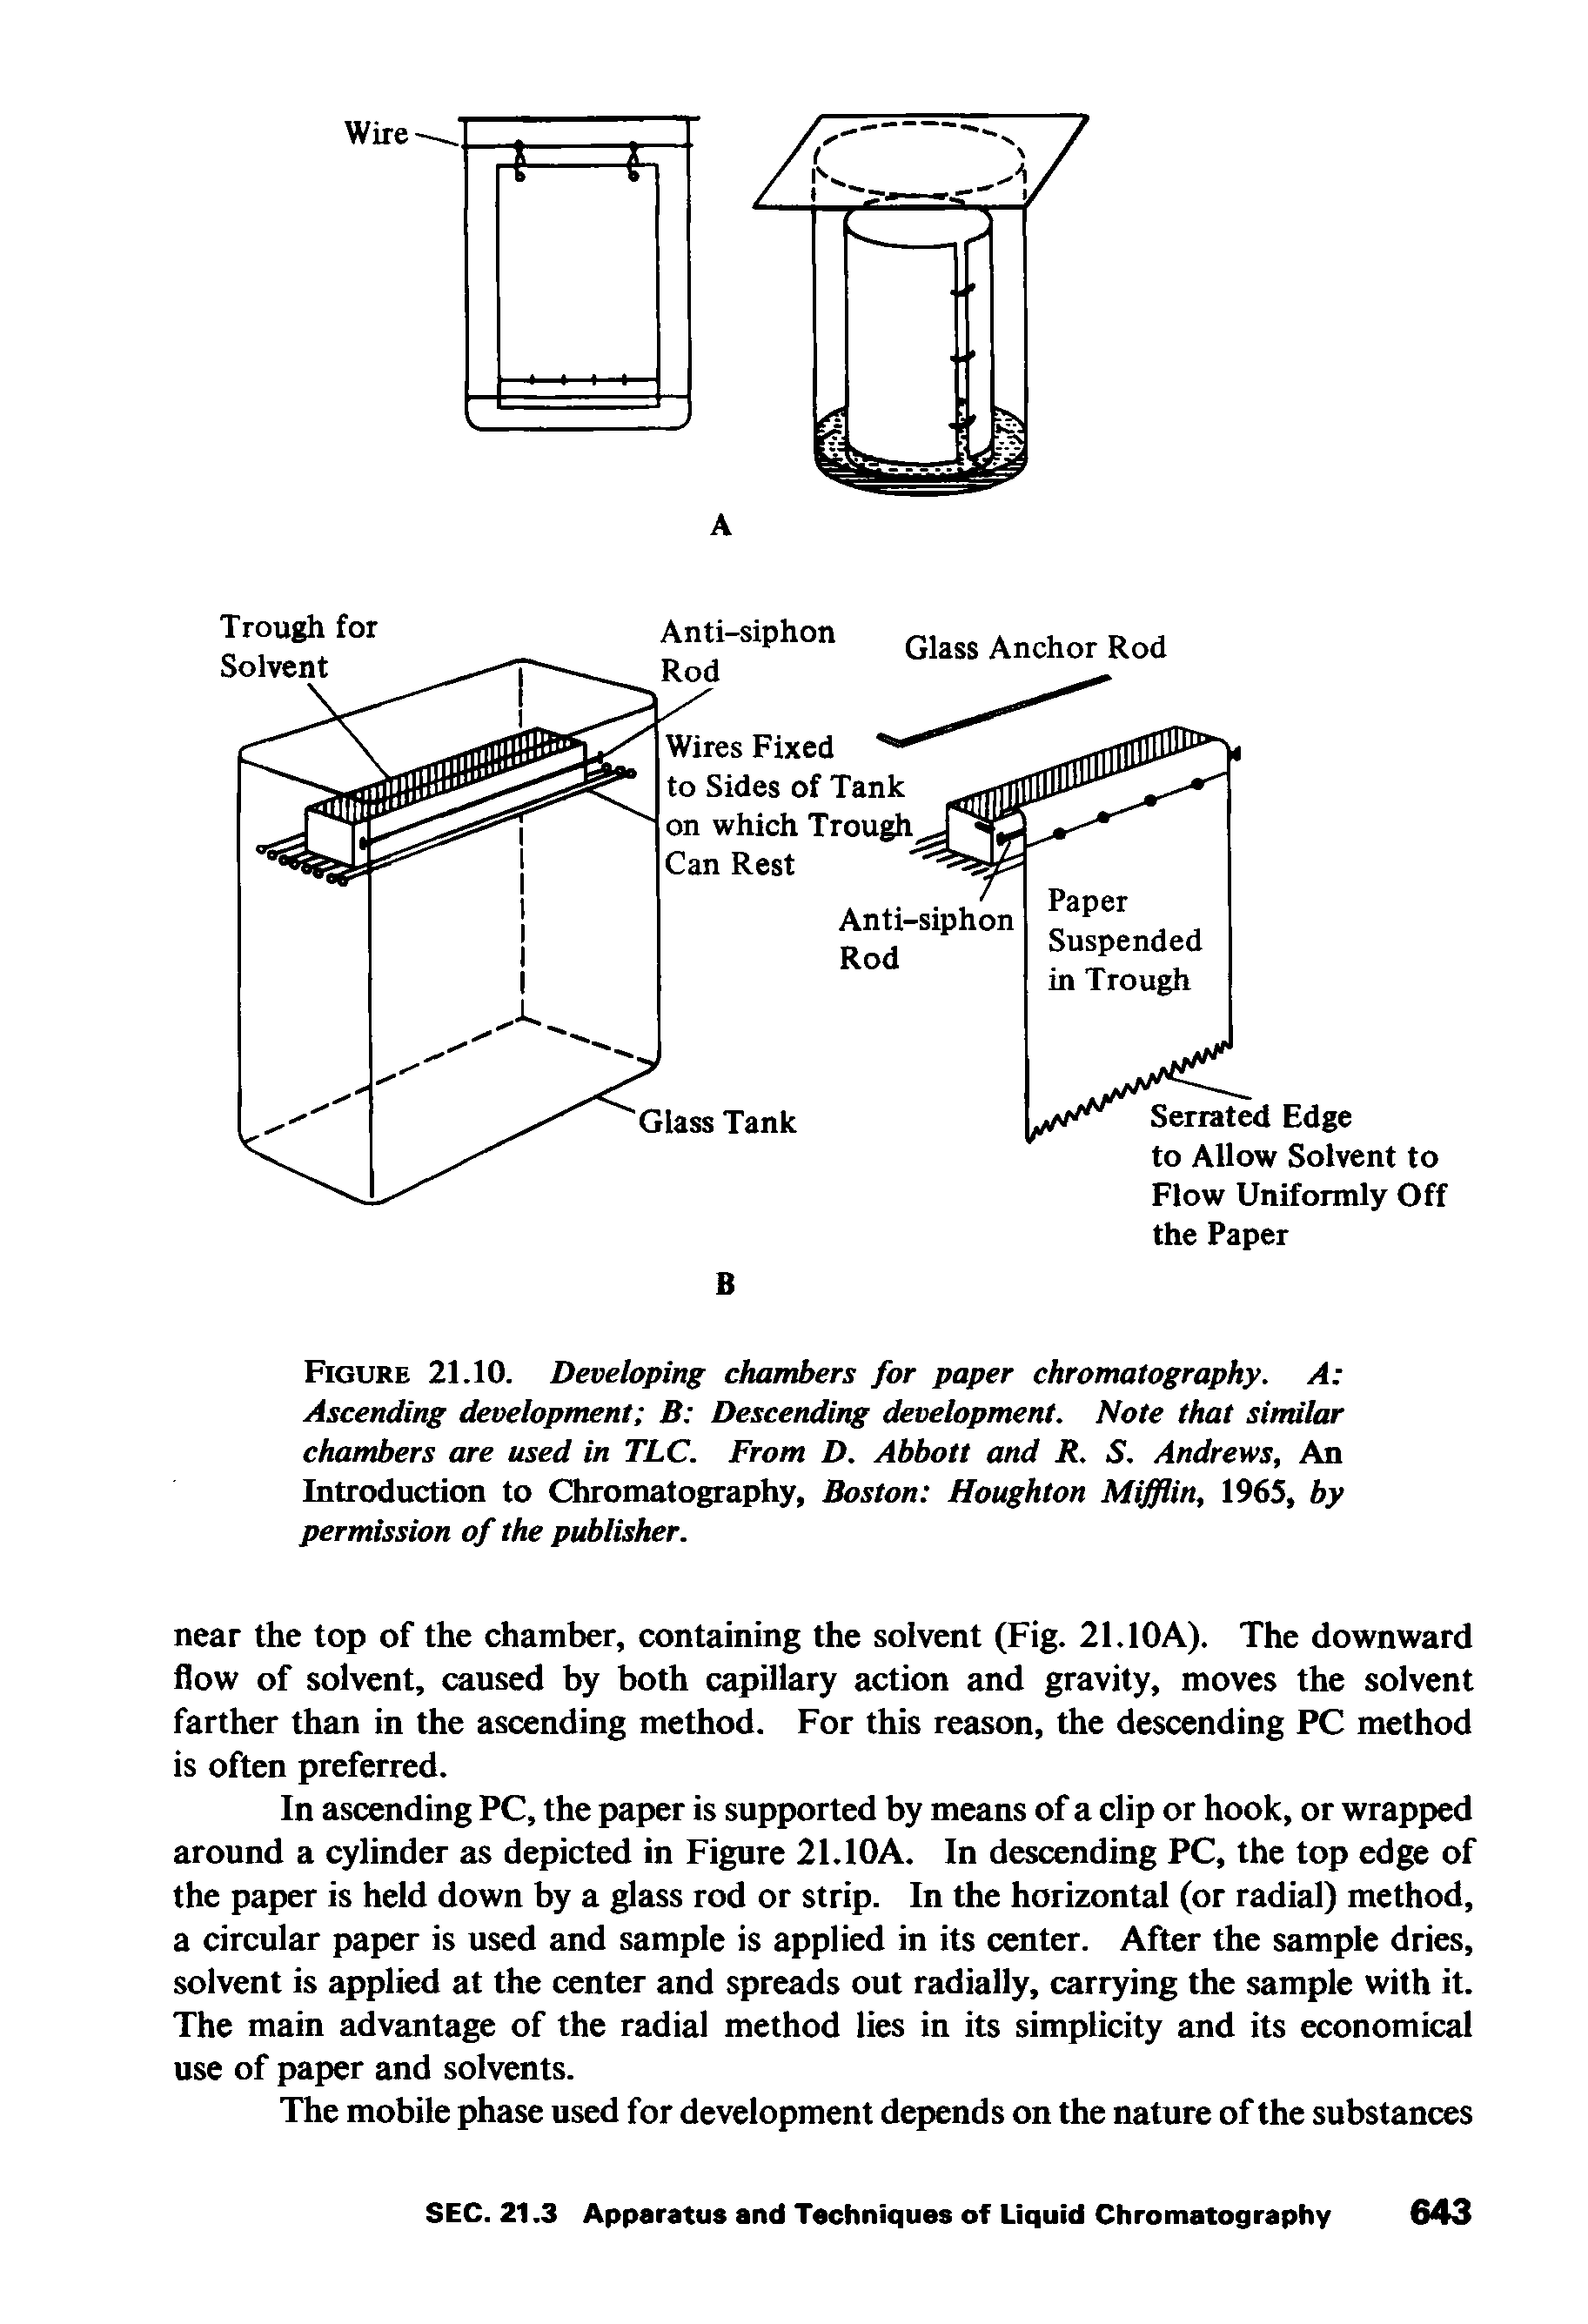 Figure 21.10. Developing chambers for paper chromatography. A Ascending development B Descending development. Note that similar chambers are used in TLC. From D. Abbott and R. S. Andrews, An Introduction to C3iromatography, Boston Houghton Mifflin, 1965, by permission of the publisher.